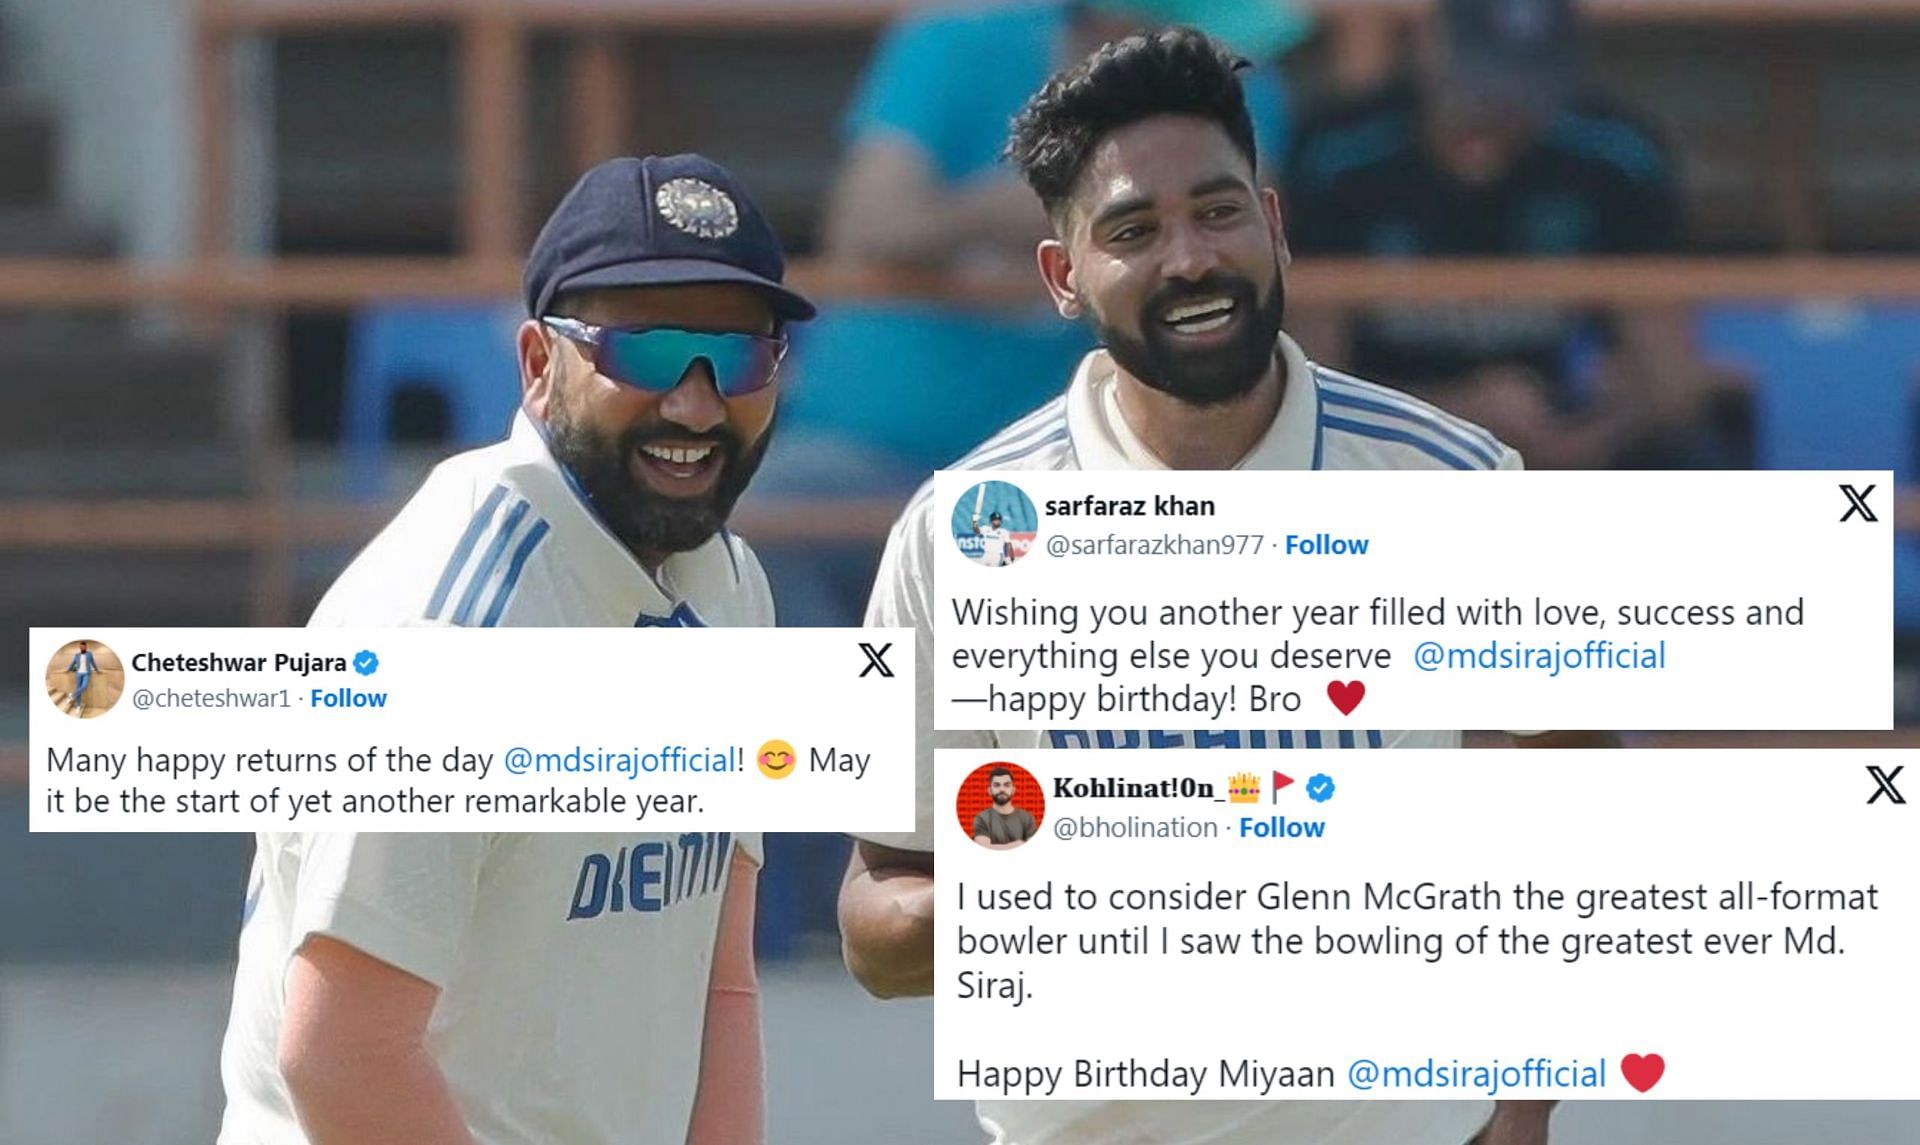 Fans wish Mohammed Siraj on his 30th birthday.